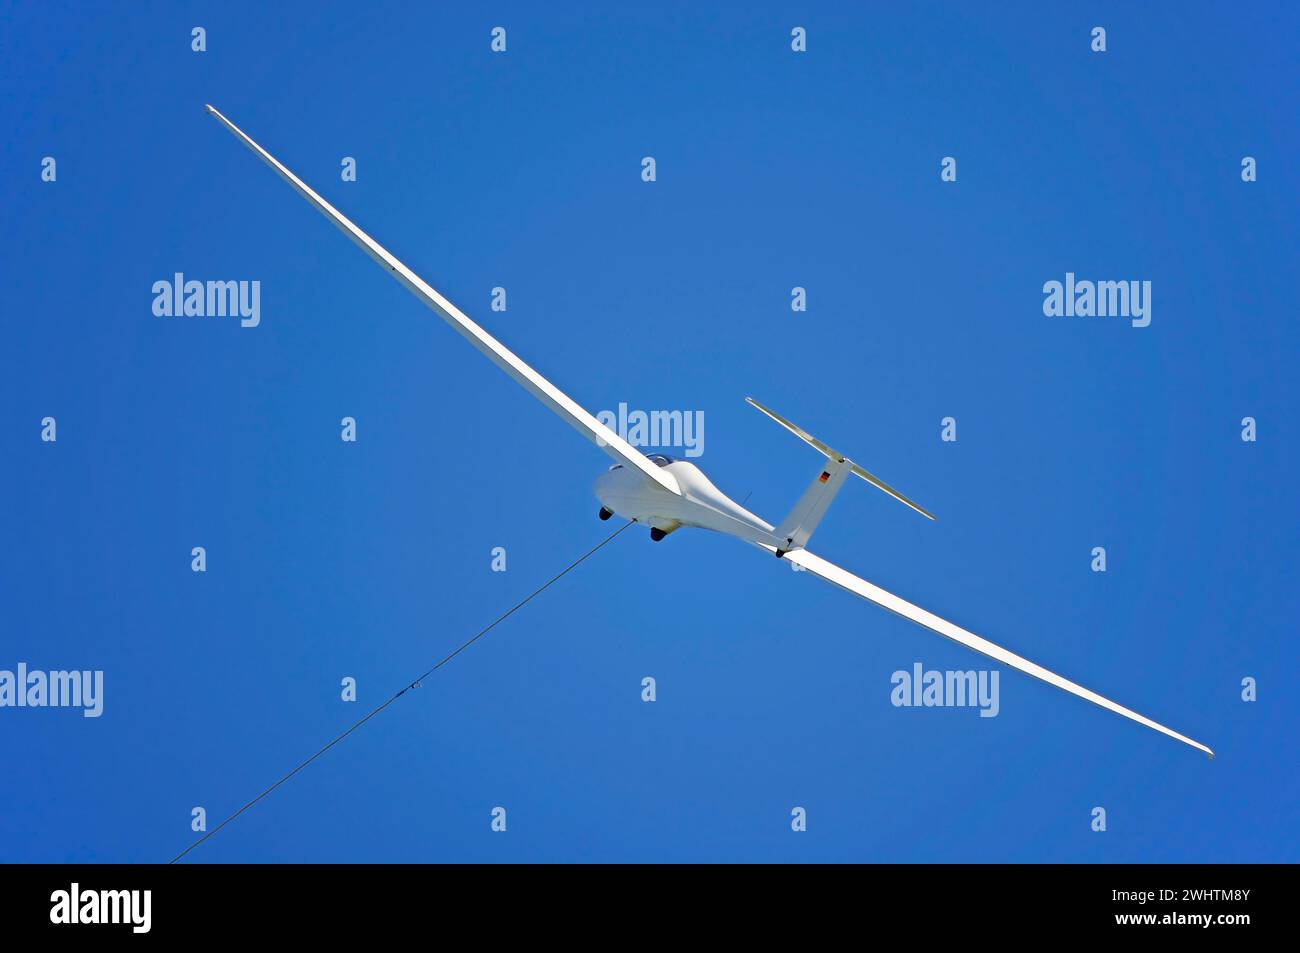 Glider on a tow rope Stock Photo